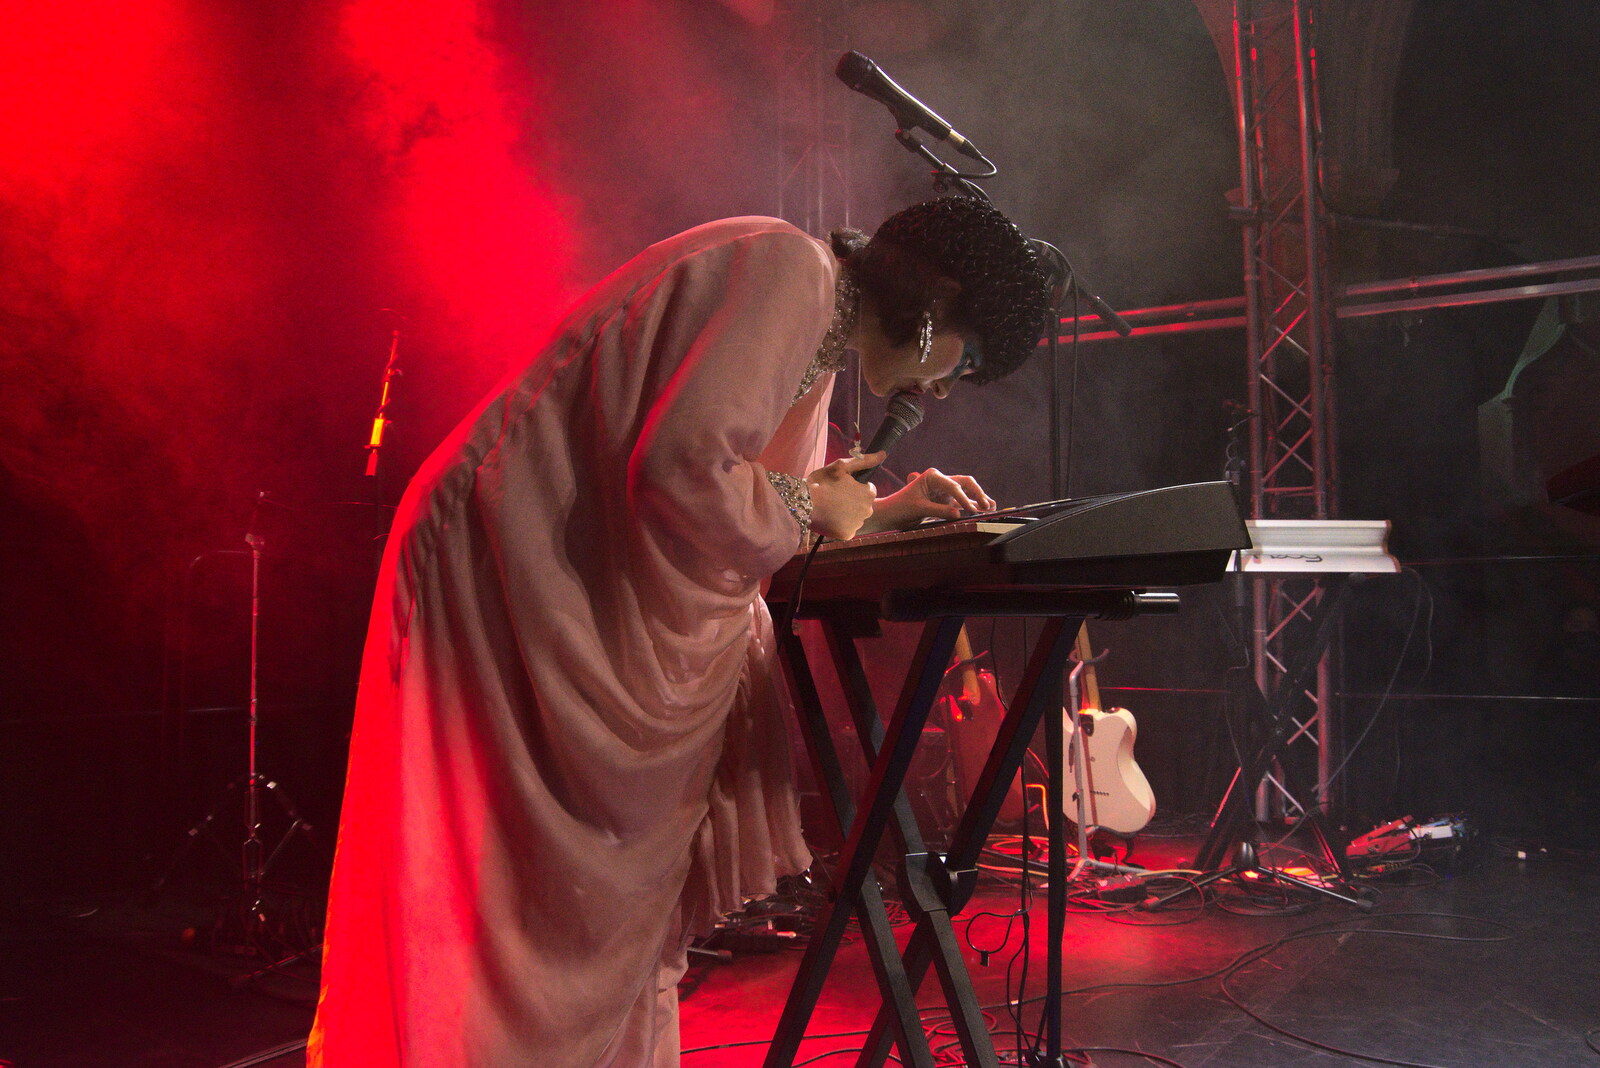 Vanity Fairy and Let's Eat Grandma, Arts Centre, Norwich - 26th January 2022: Daisy pretends to fiddle with a keyboard